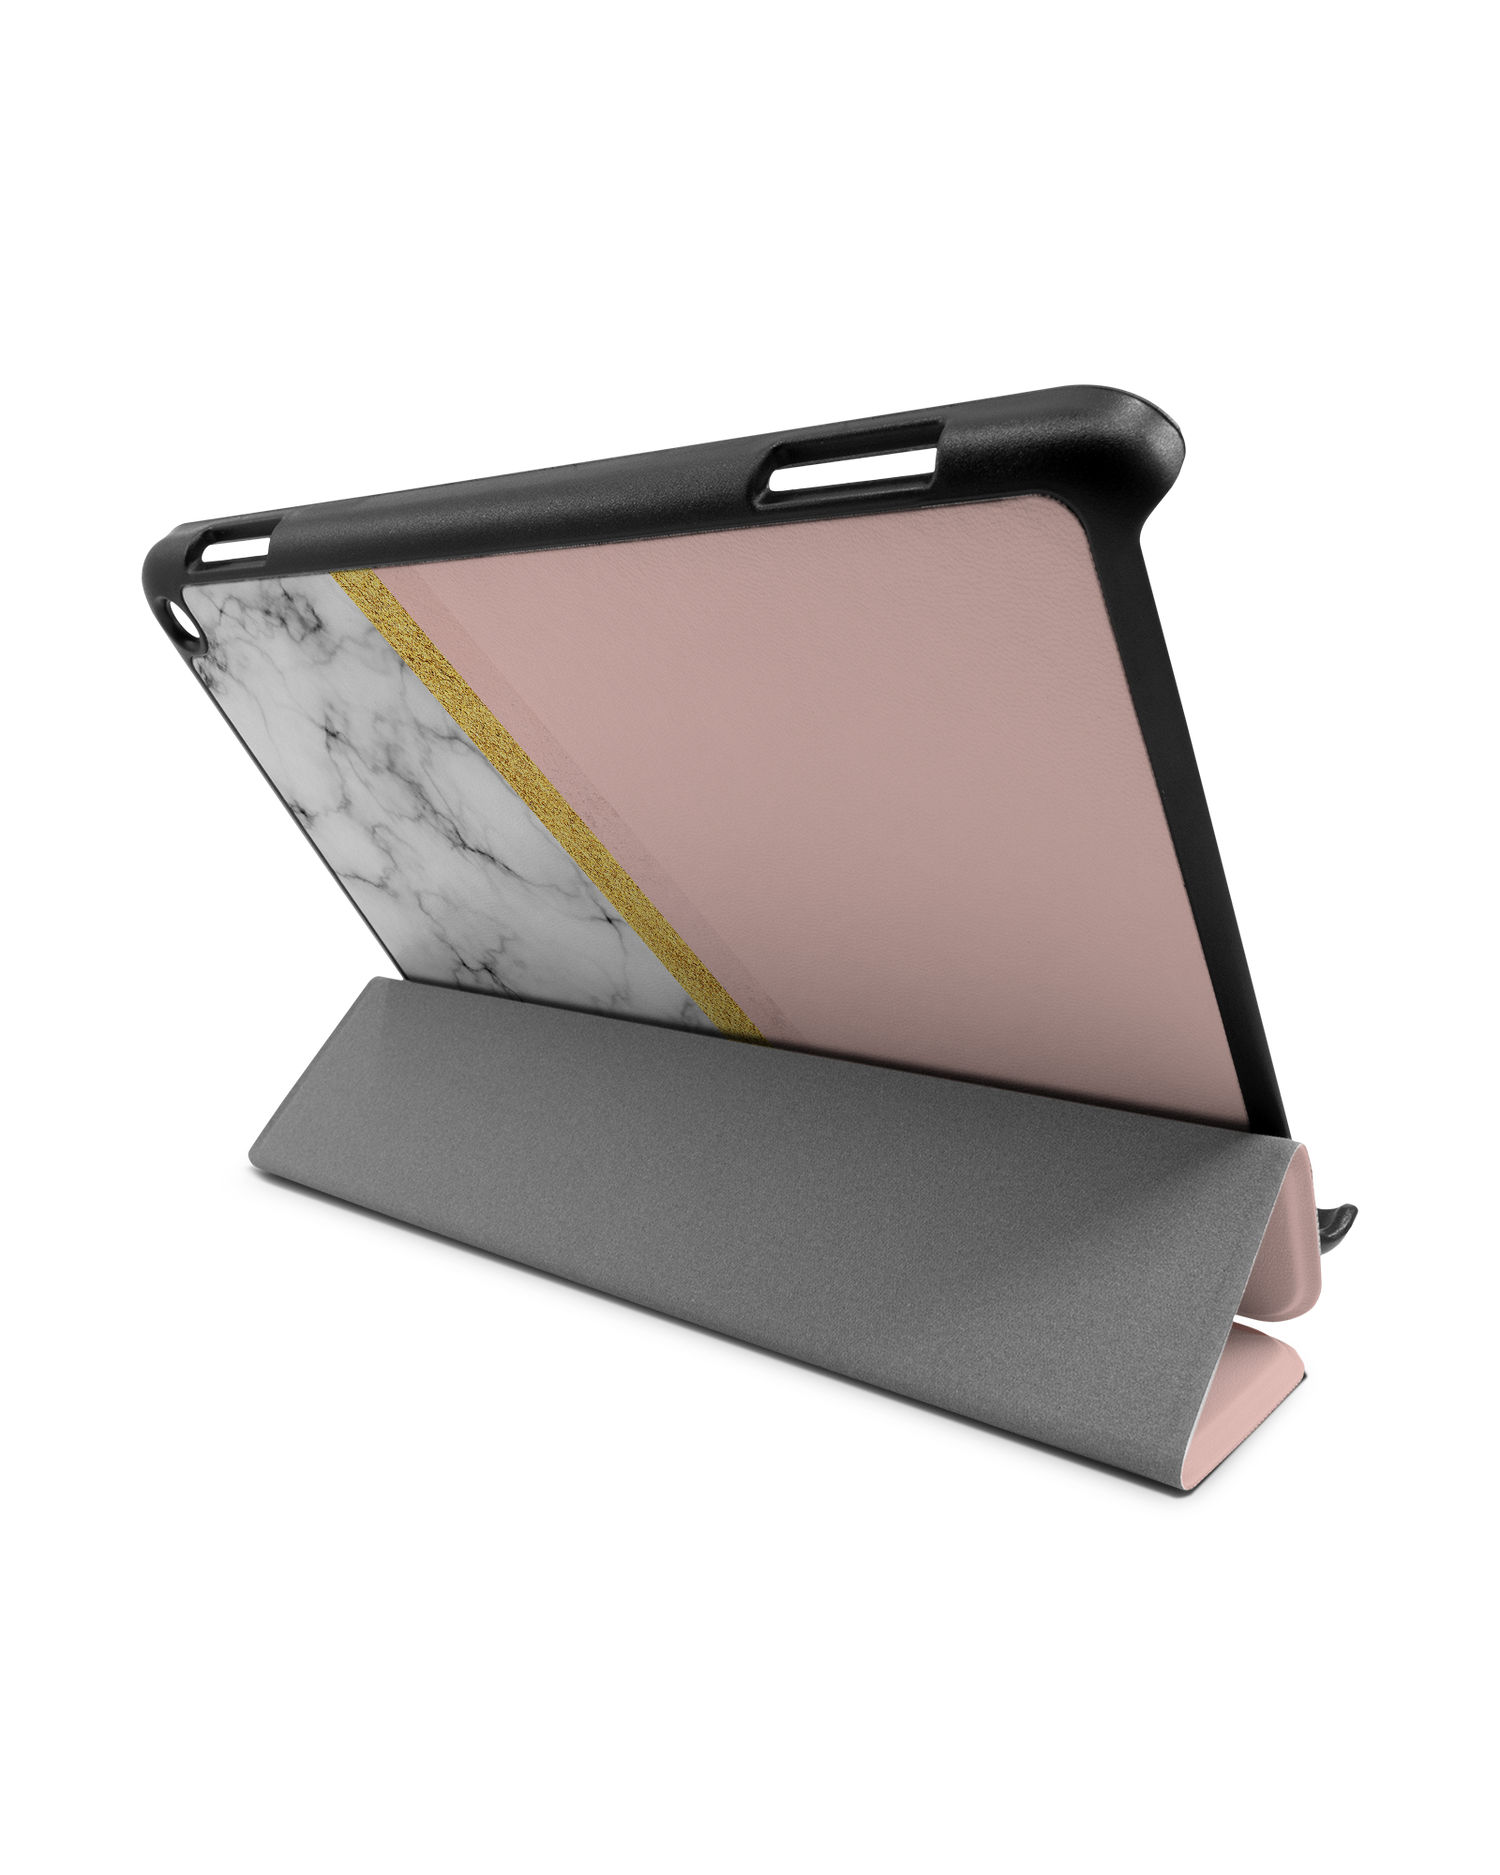 Marble Slice Tablet Smart Case for Amazon Fire HD 8 (2022), Amazon Fire HD 8 Plus (2022), Amazon Fire HD 8 (2020), Amazon Fire HD 8 Plus (2020): Used as Stand